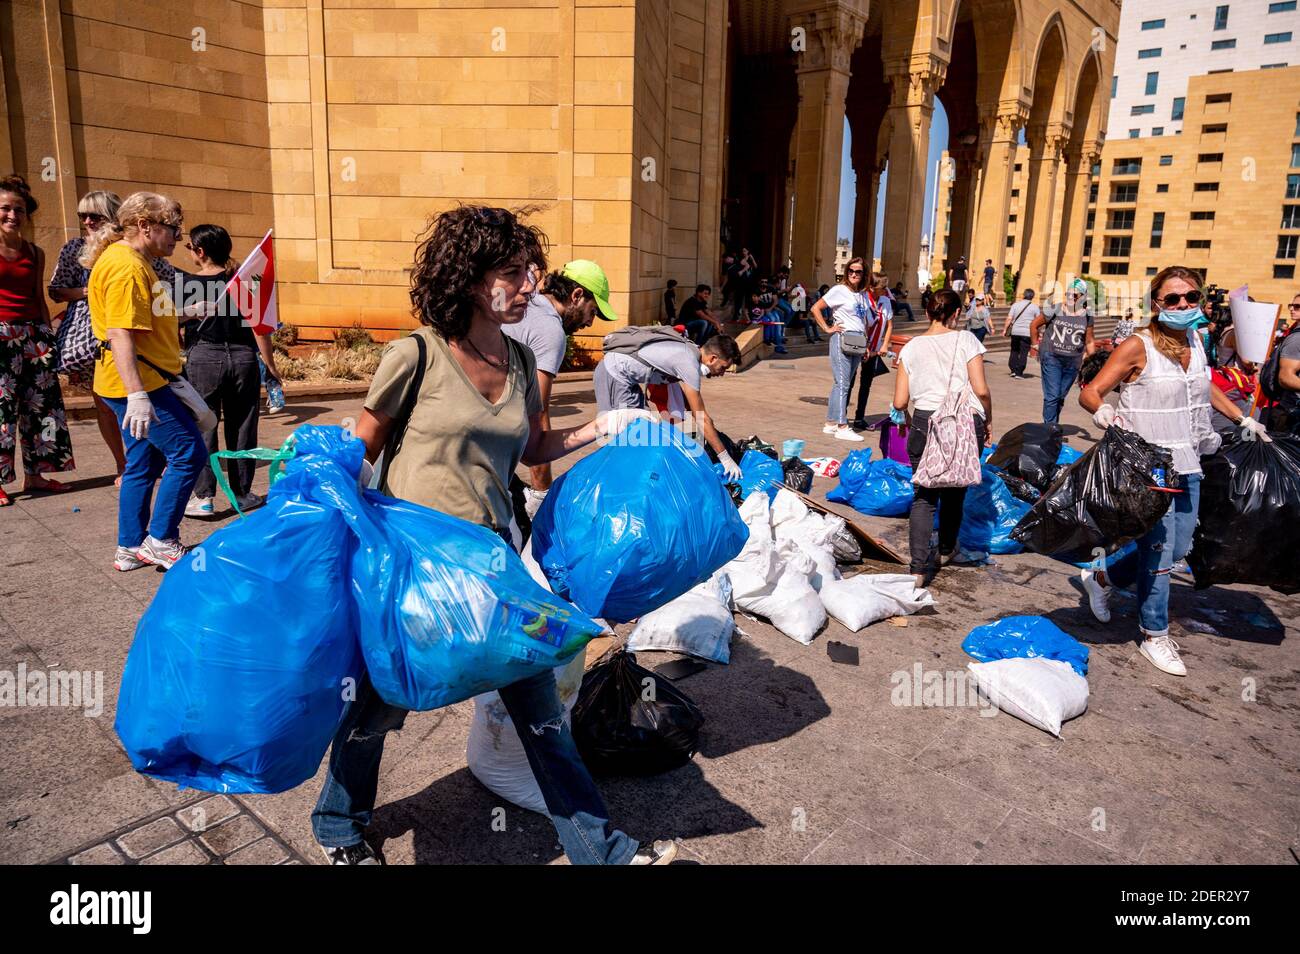 Lebanese demonstrators clean rubbish in Beirut on October 19, 2019, after demonstrations swept through the eastern Mediterranean country in protest against dire economic conditions. Tens of thousands of people took to the streets for a third day of protests against tax increases and alleged official corruption. The protesters took to the streets despite calls for calm from politicians and dozens of arrests on Friday. Many waved billowing Lebanese flags and insisted the protests should remain peaceful and non-sectarian. The demonstrators are demanding a sweeping overhaul of Lebanon's political Stock Photo